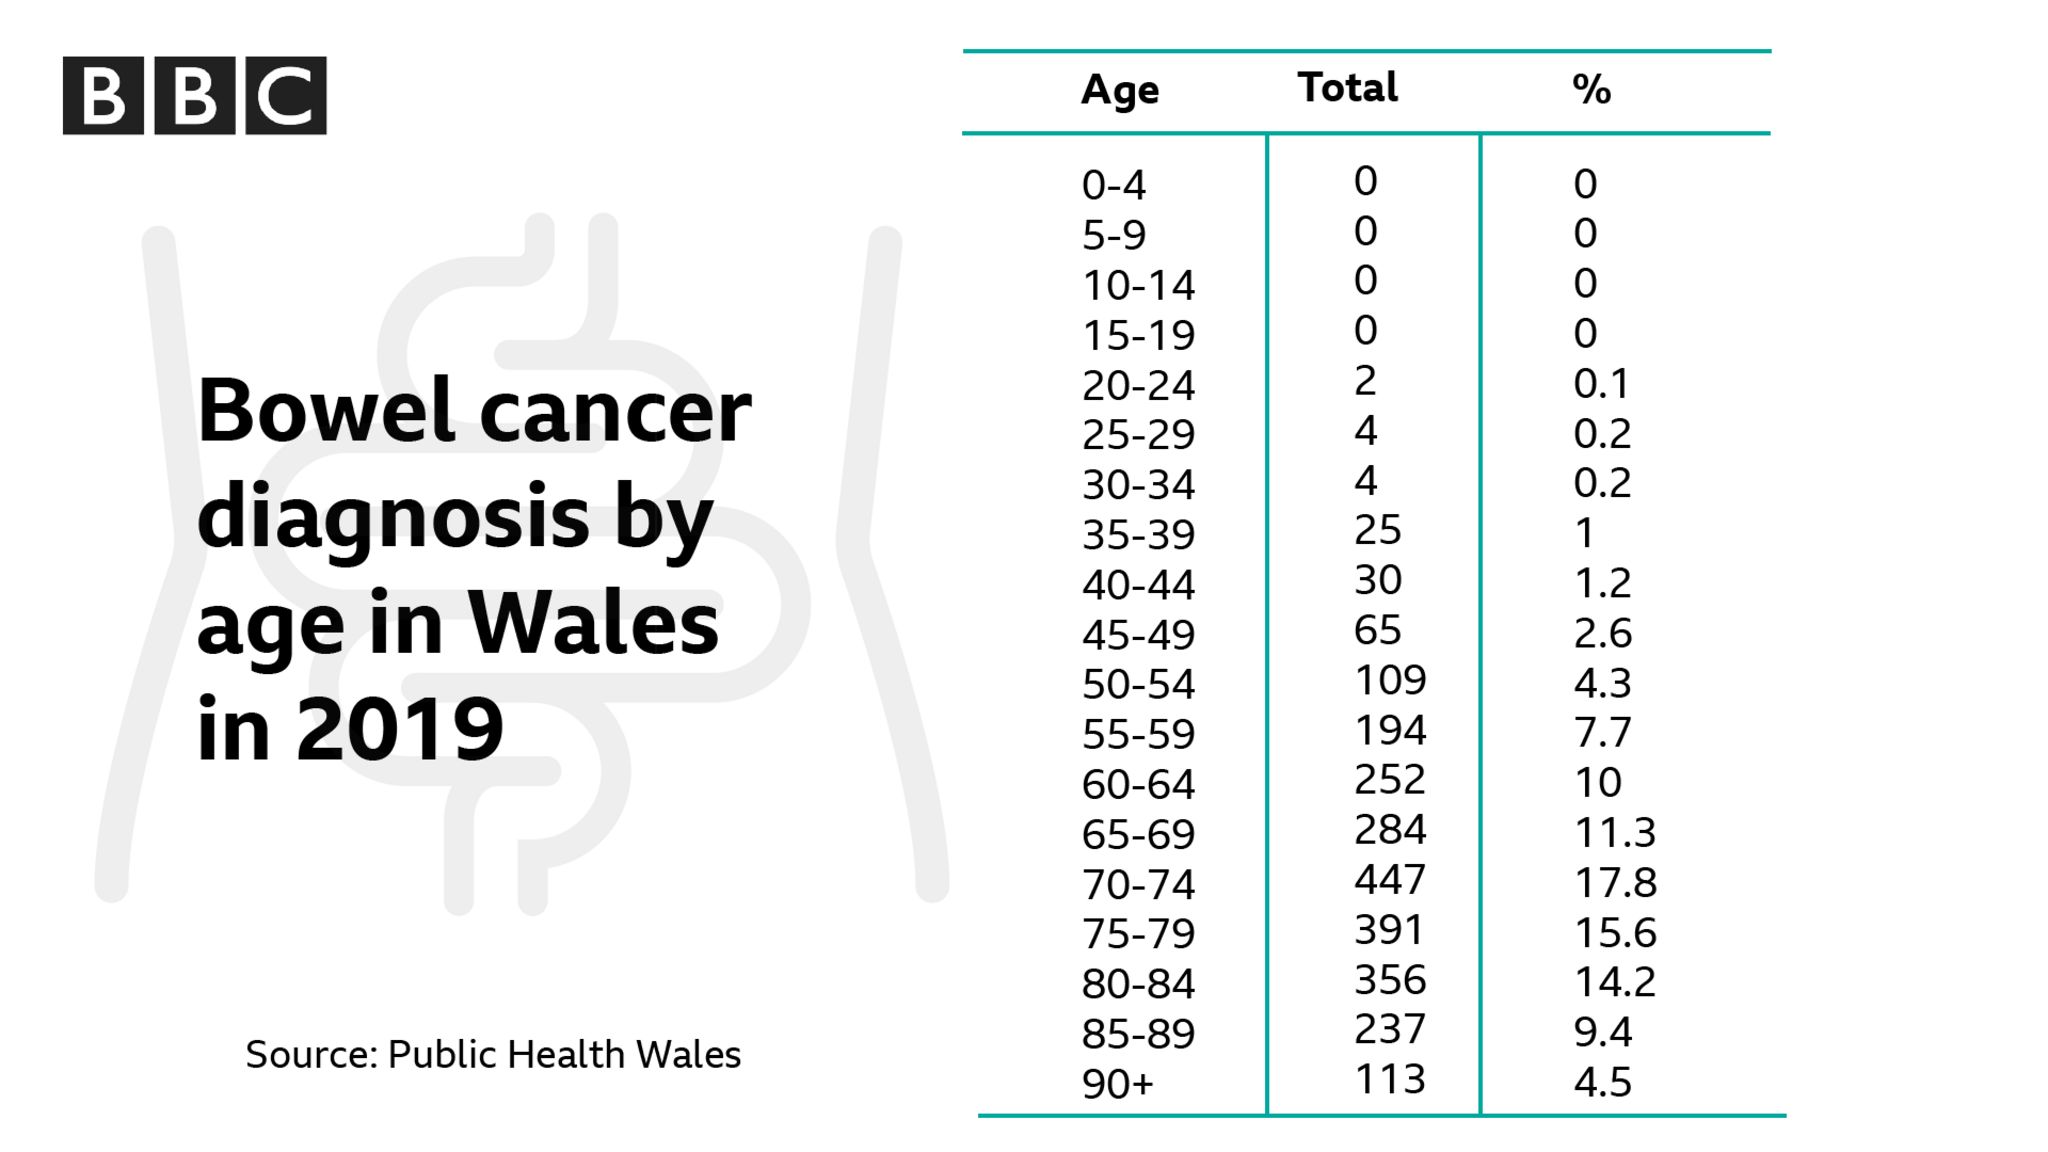 Bowe cancer diagnoses by age